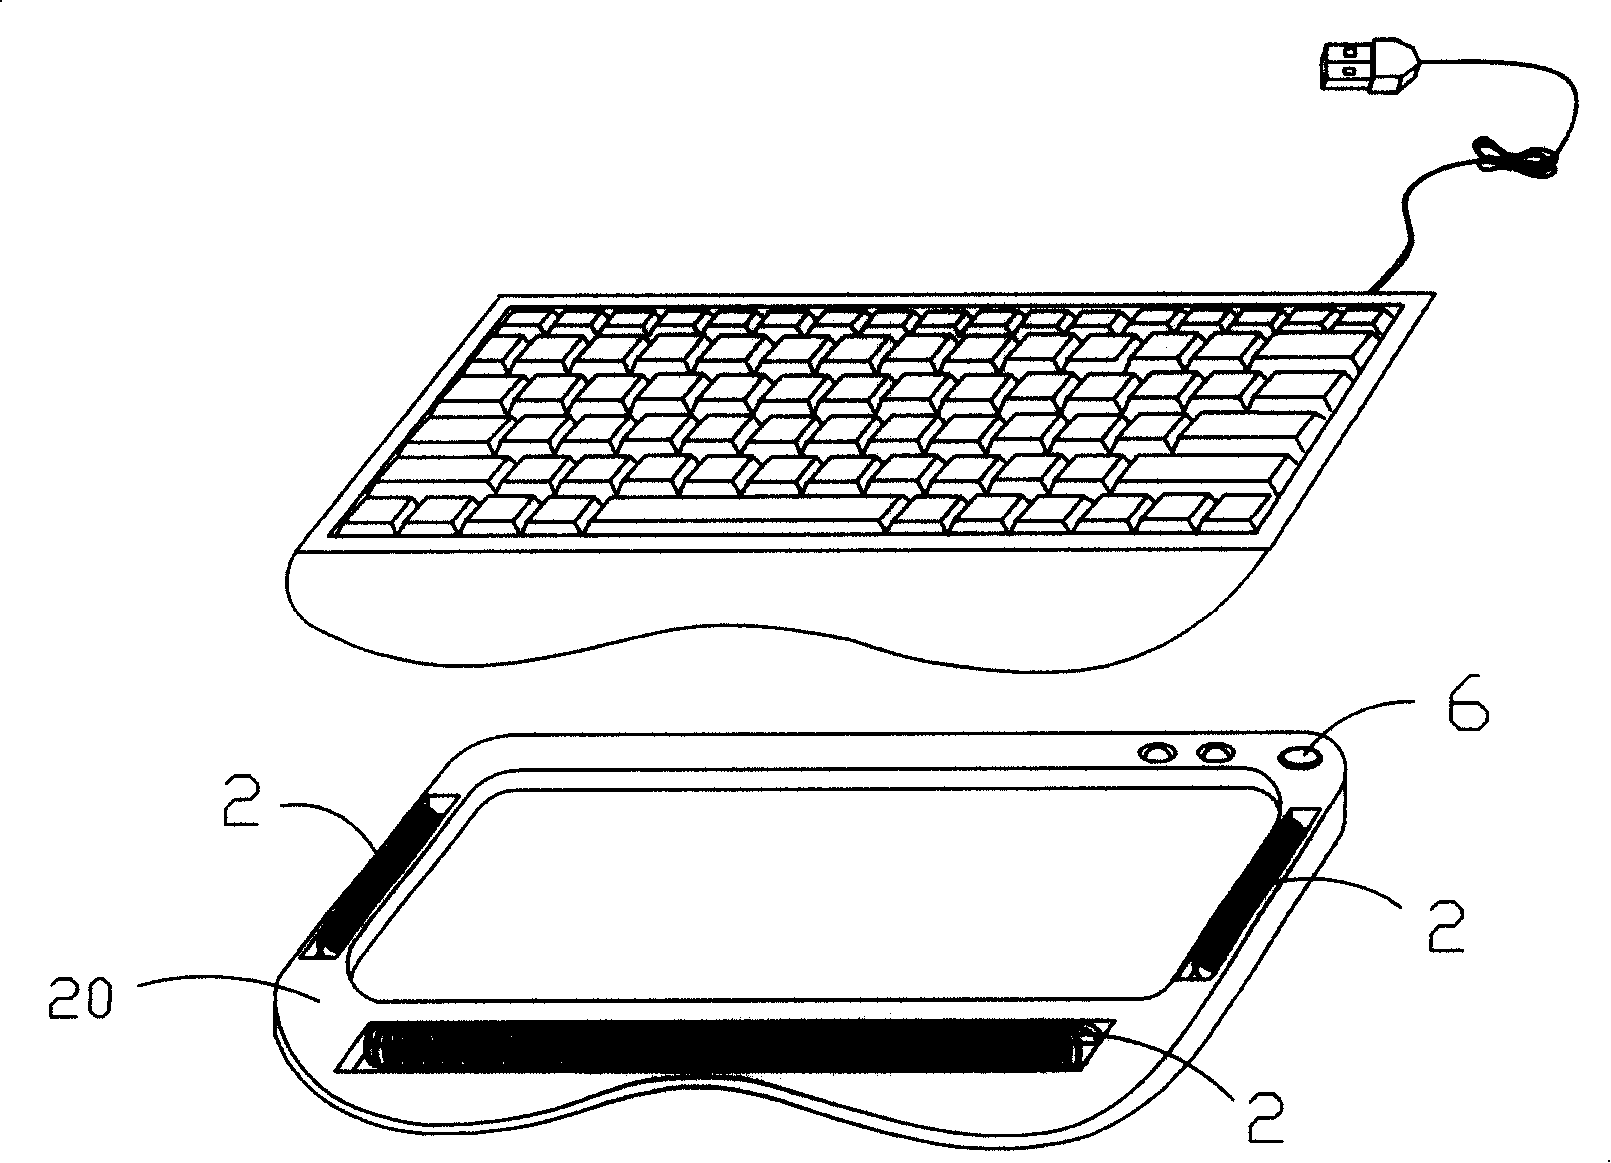 Computer peripheral warming and heating device